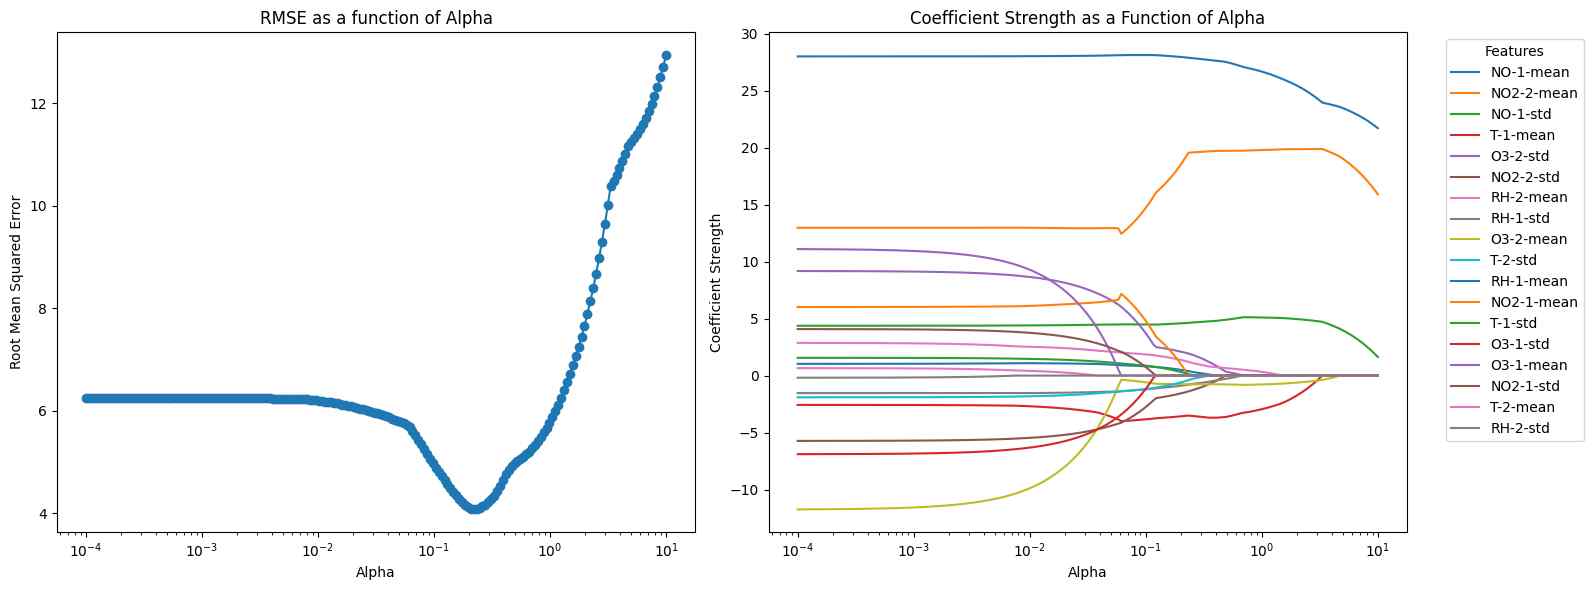 Optimizing alpha in Lasso regression to minimize RMSE. The graphs shows the RMSE and coefficient strength as a function of Alpha.